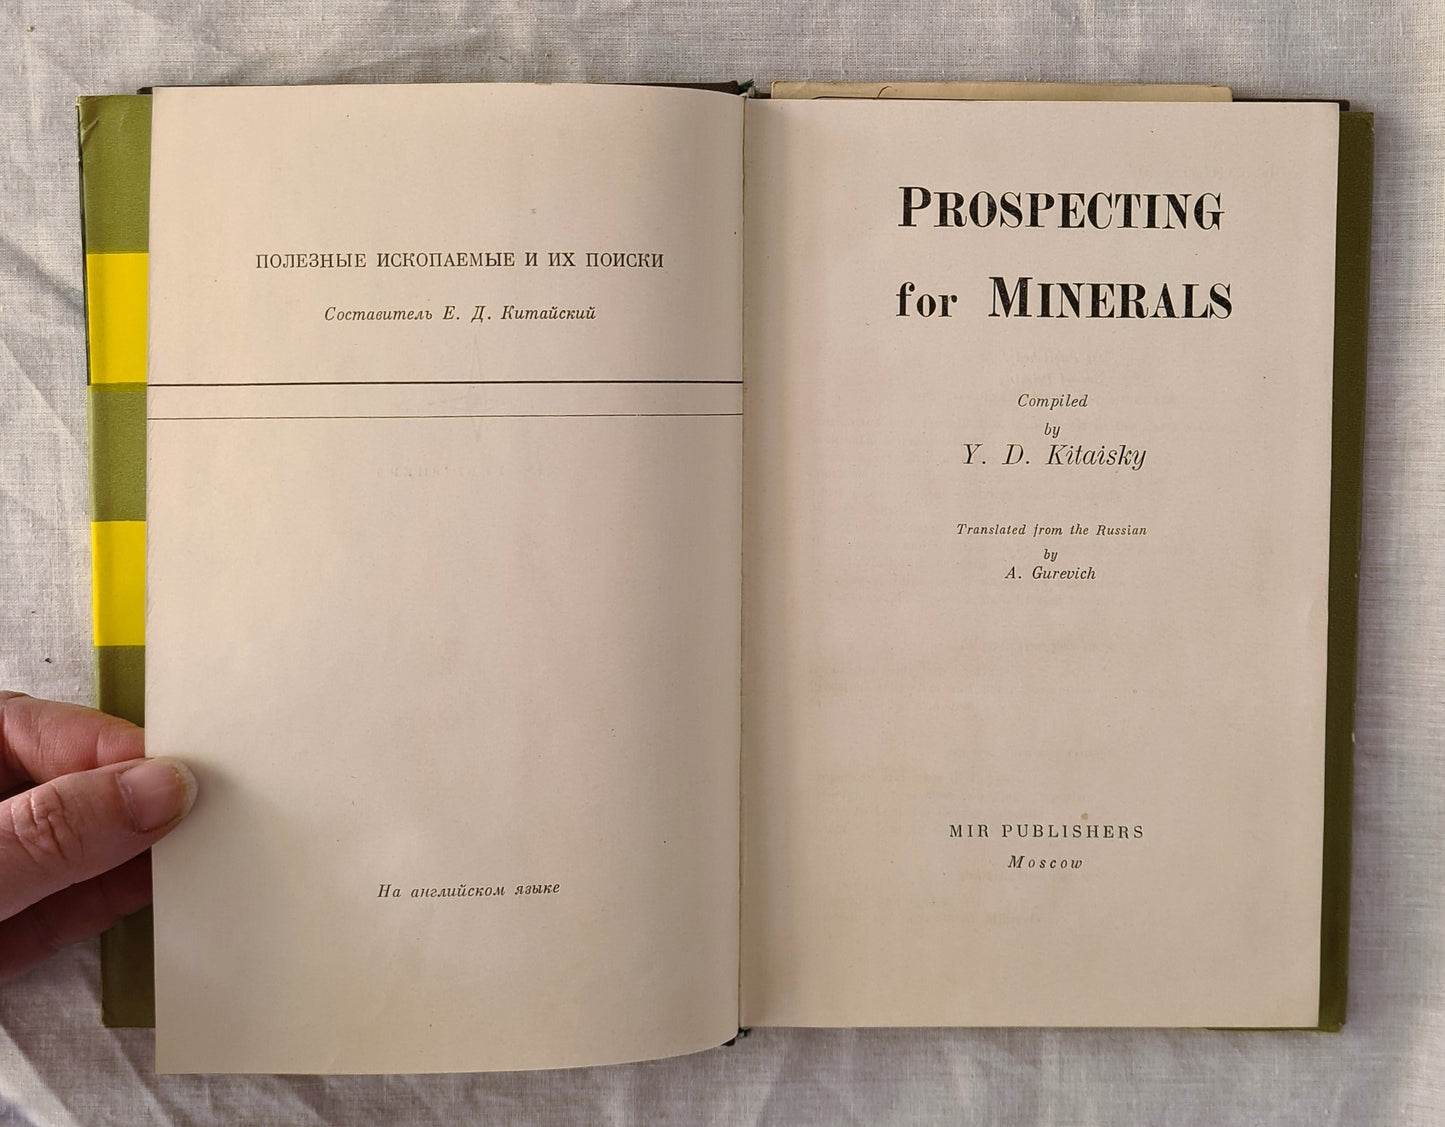 Prospecting For Minerals by Y. D. Kitaisky